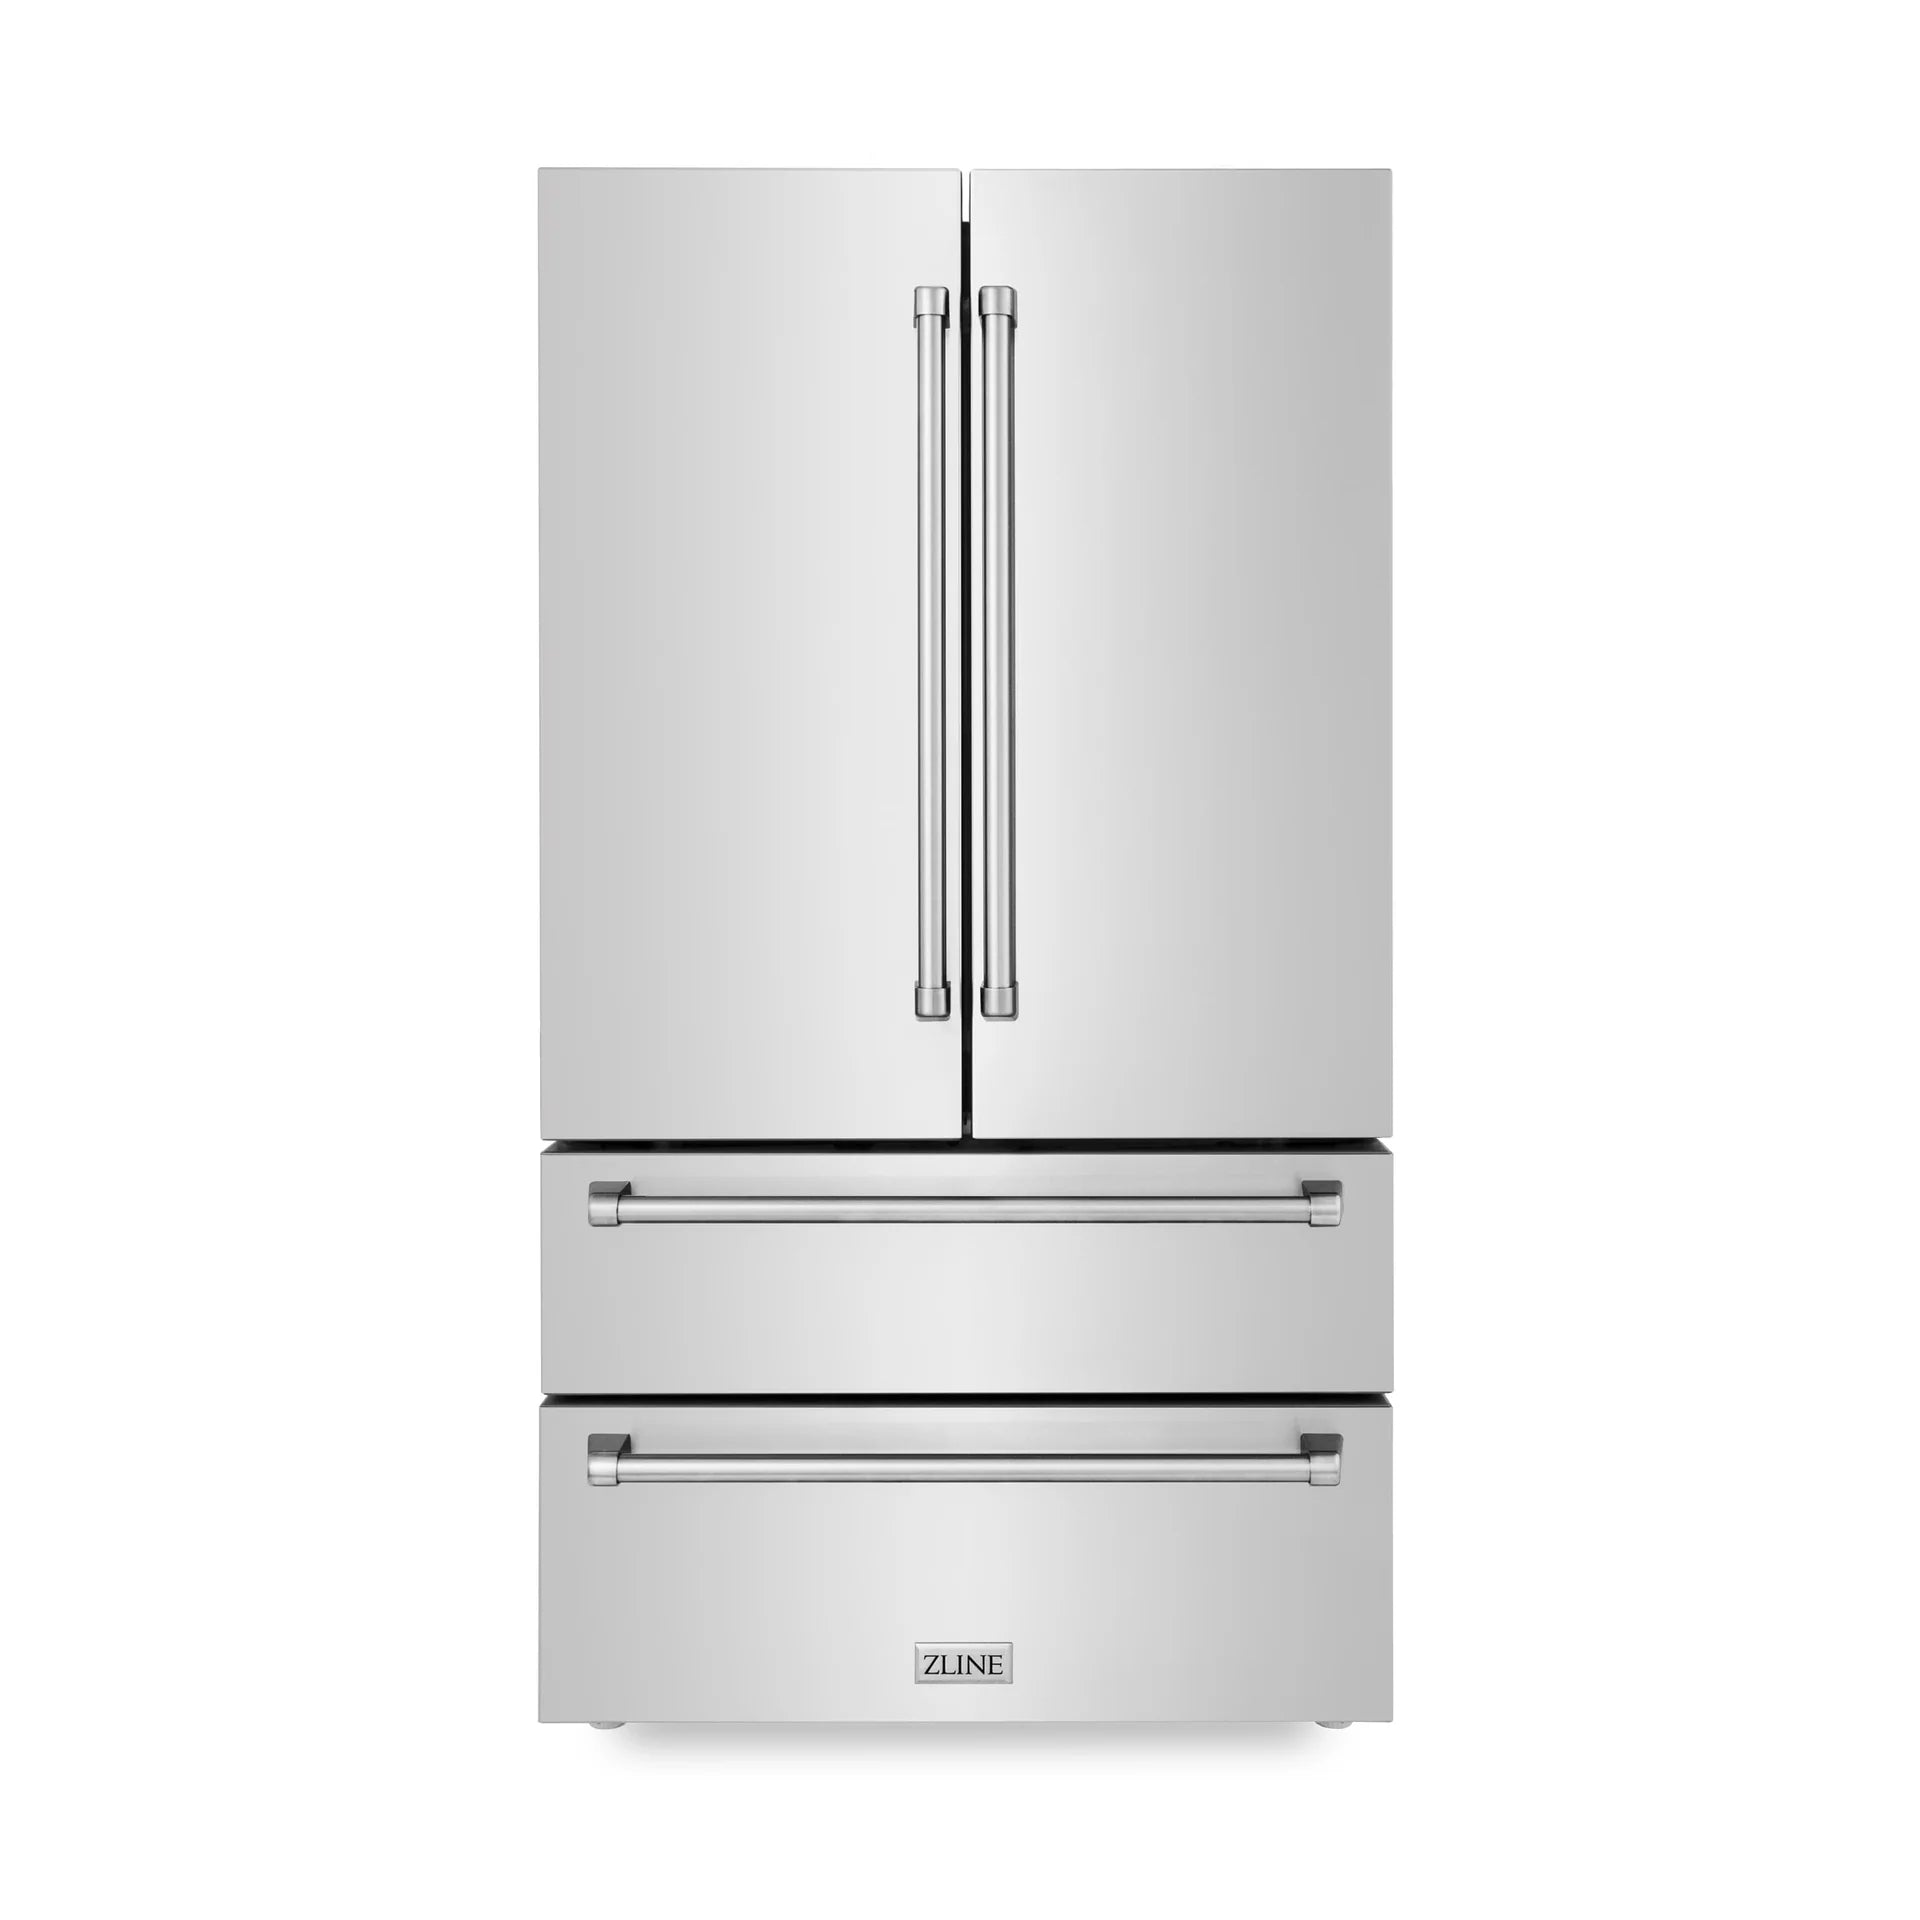 ZLINE Kitchen Package with Refrigeration, 36 in. Stainless Steel Gas Rangetop, 36 in. Convertible Vent Range Hood, 30 in. Double Wall Oven, and 24 in. Tall Tub Dishwasher (5KPR-RTRH36-AWDDWV)